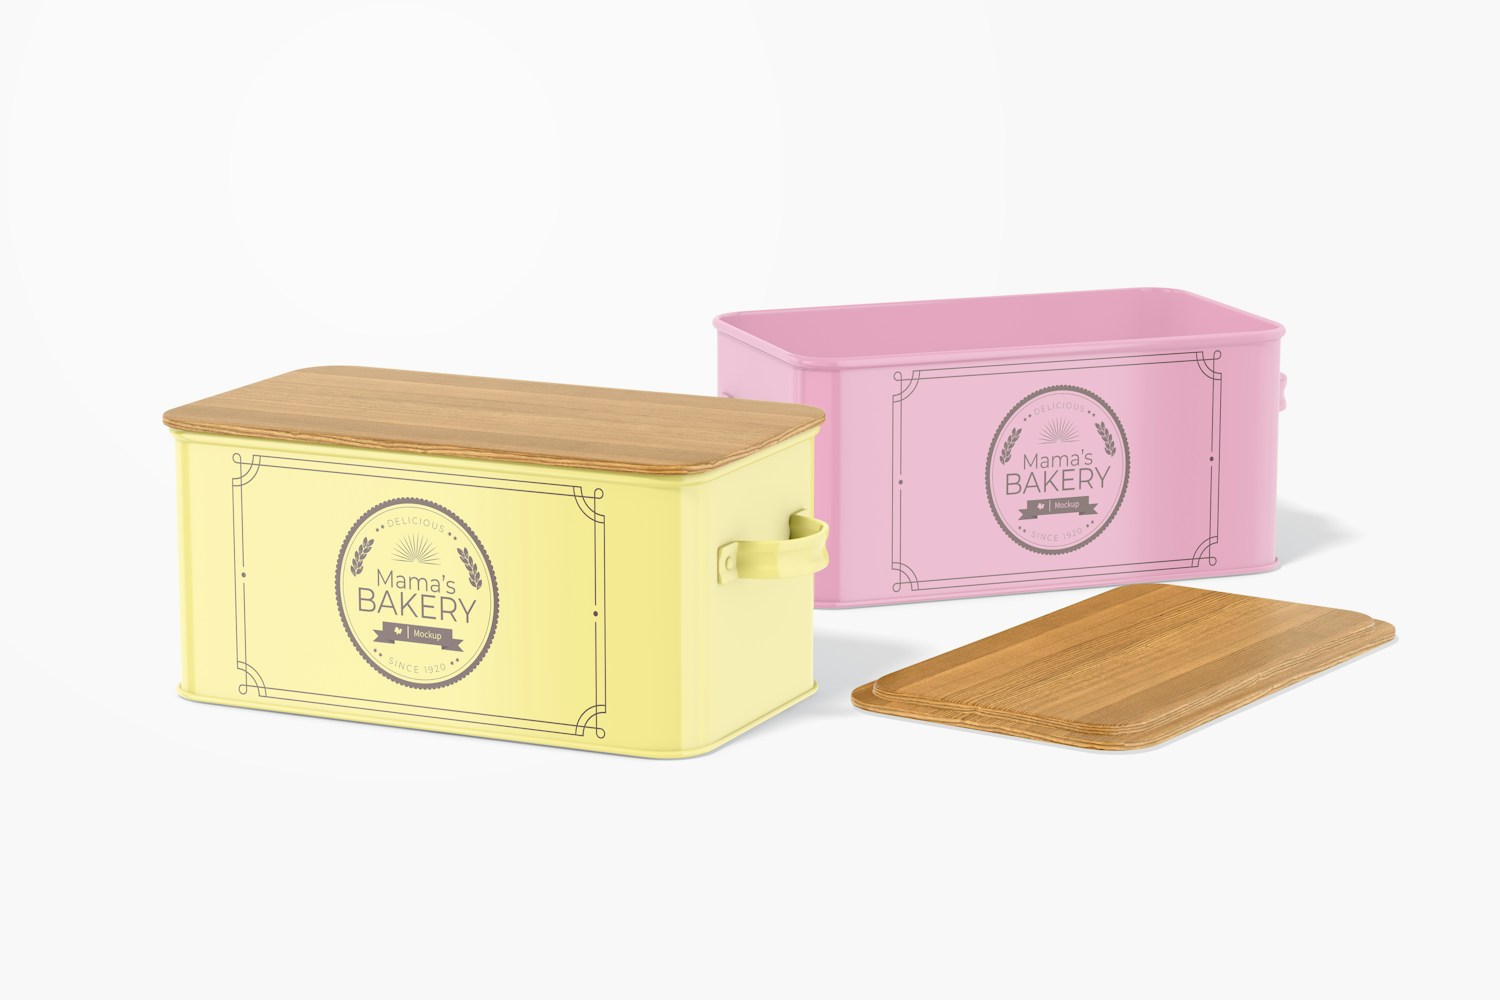 Bakery Boxes With Bamboo Lid Mockup